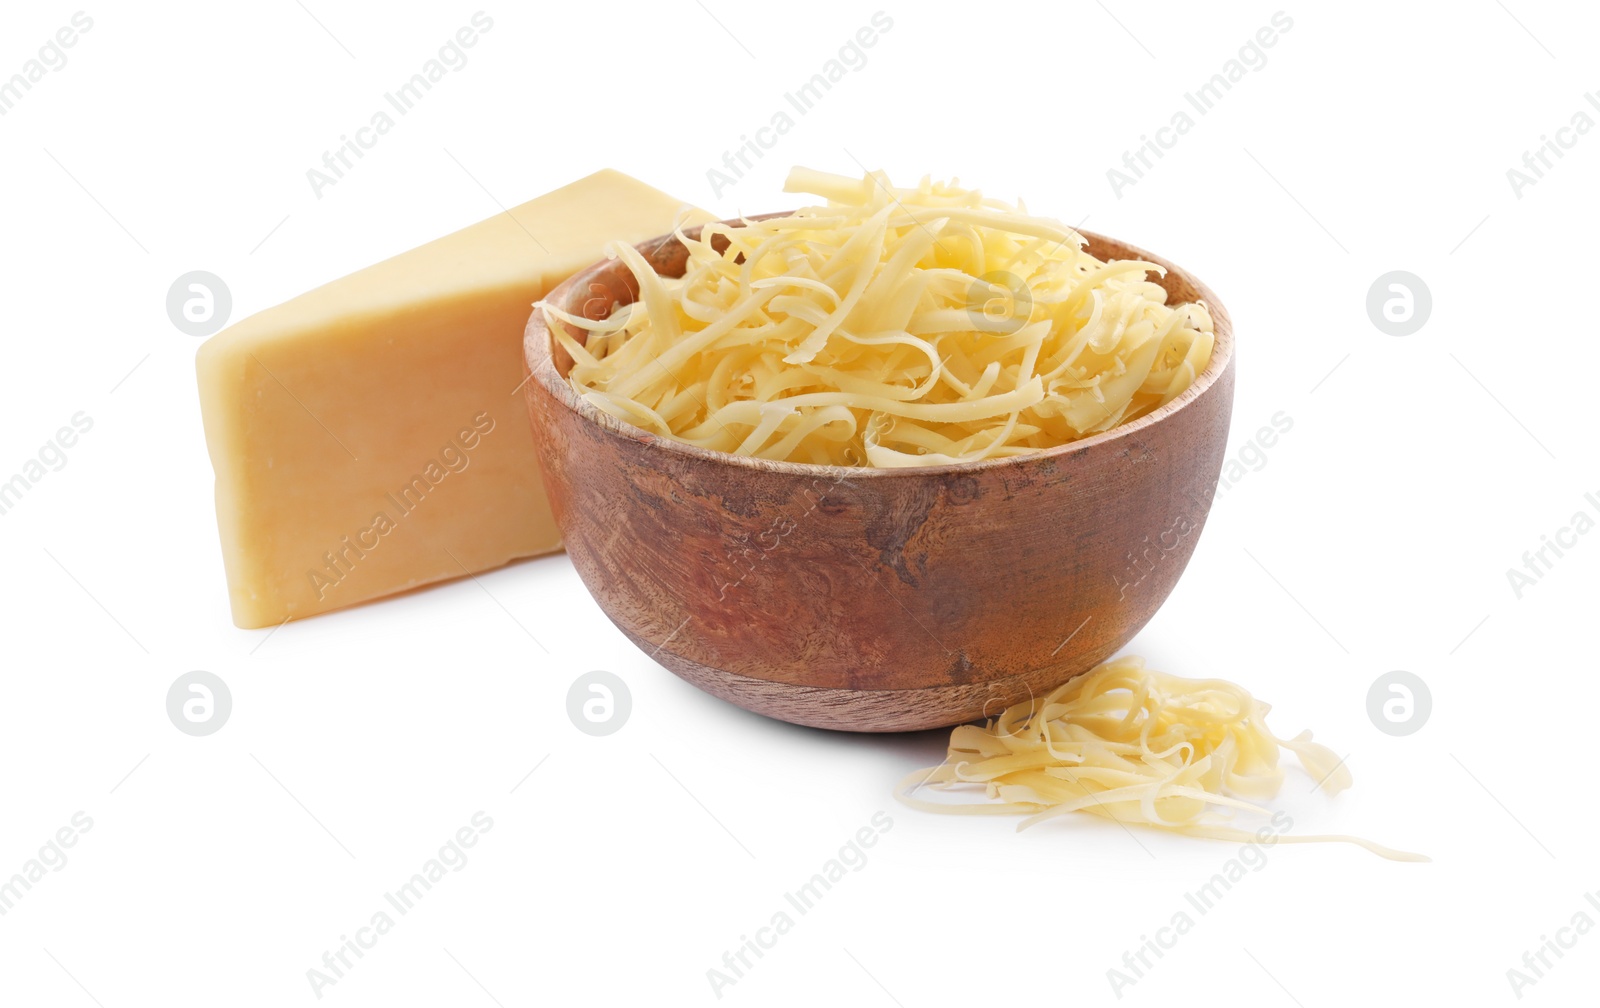 Photo of Grated and whole piece of cheese isolated on white